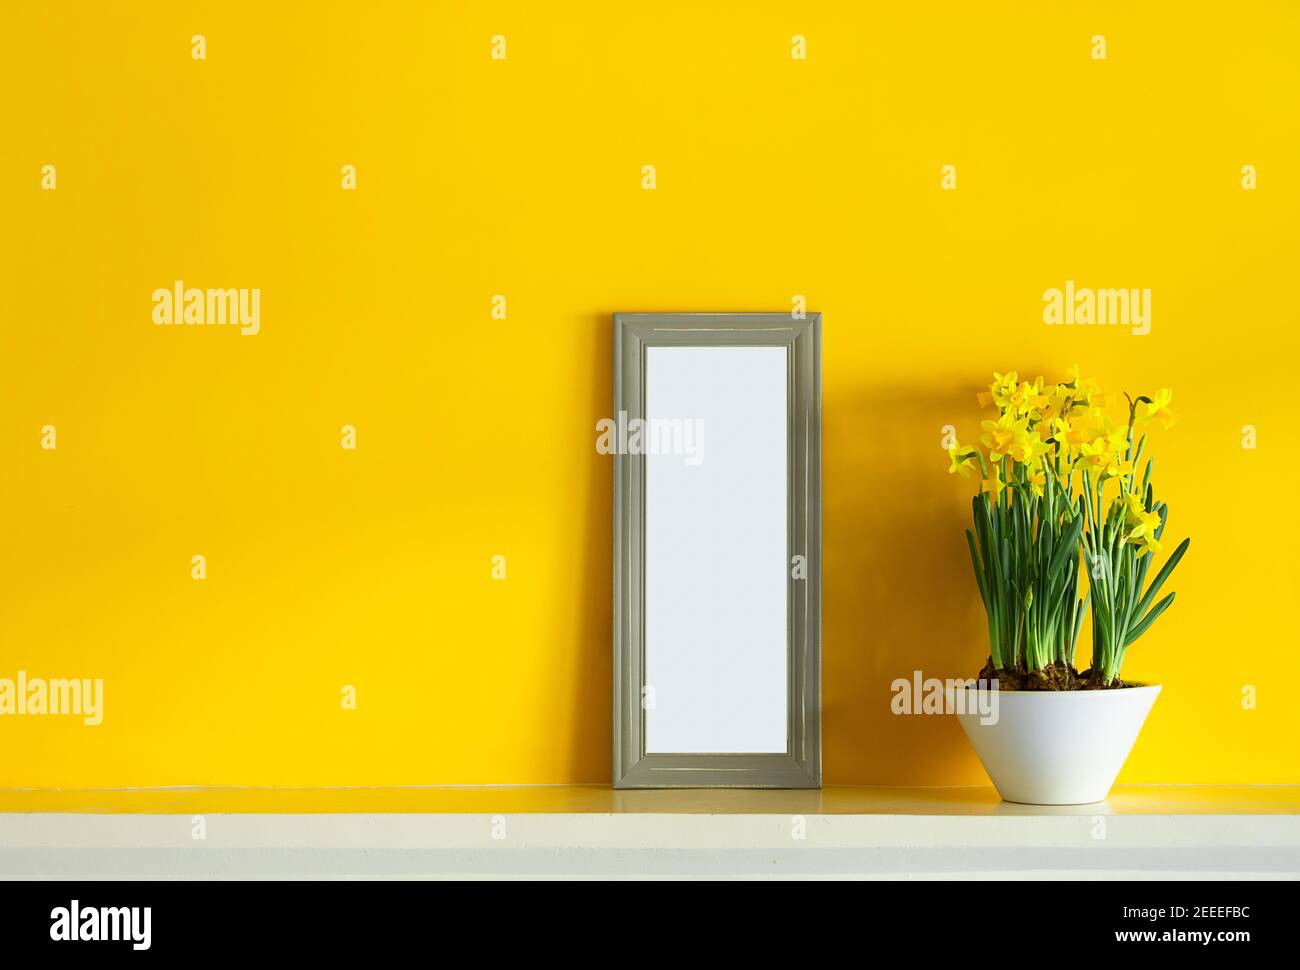 A white ceramic pot with blooming yellow daffodils and a gray photoframe on a yellow background with copy space Stock Photo